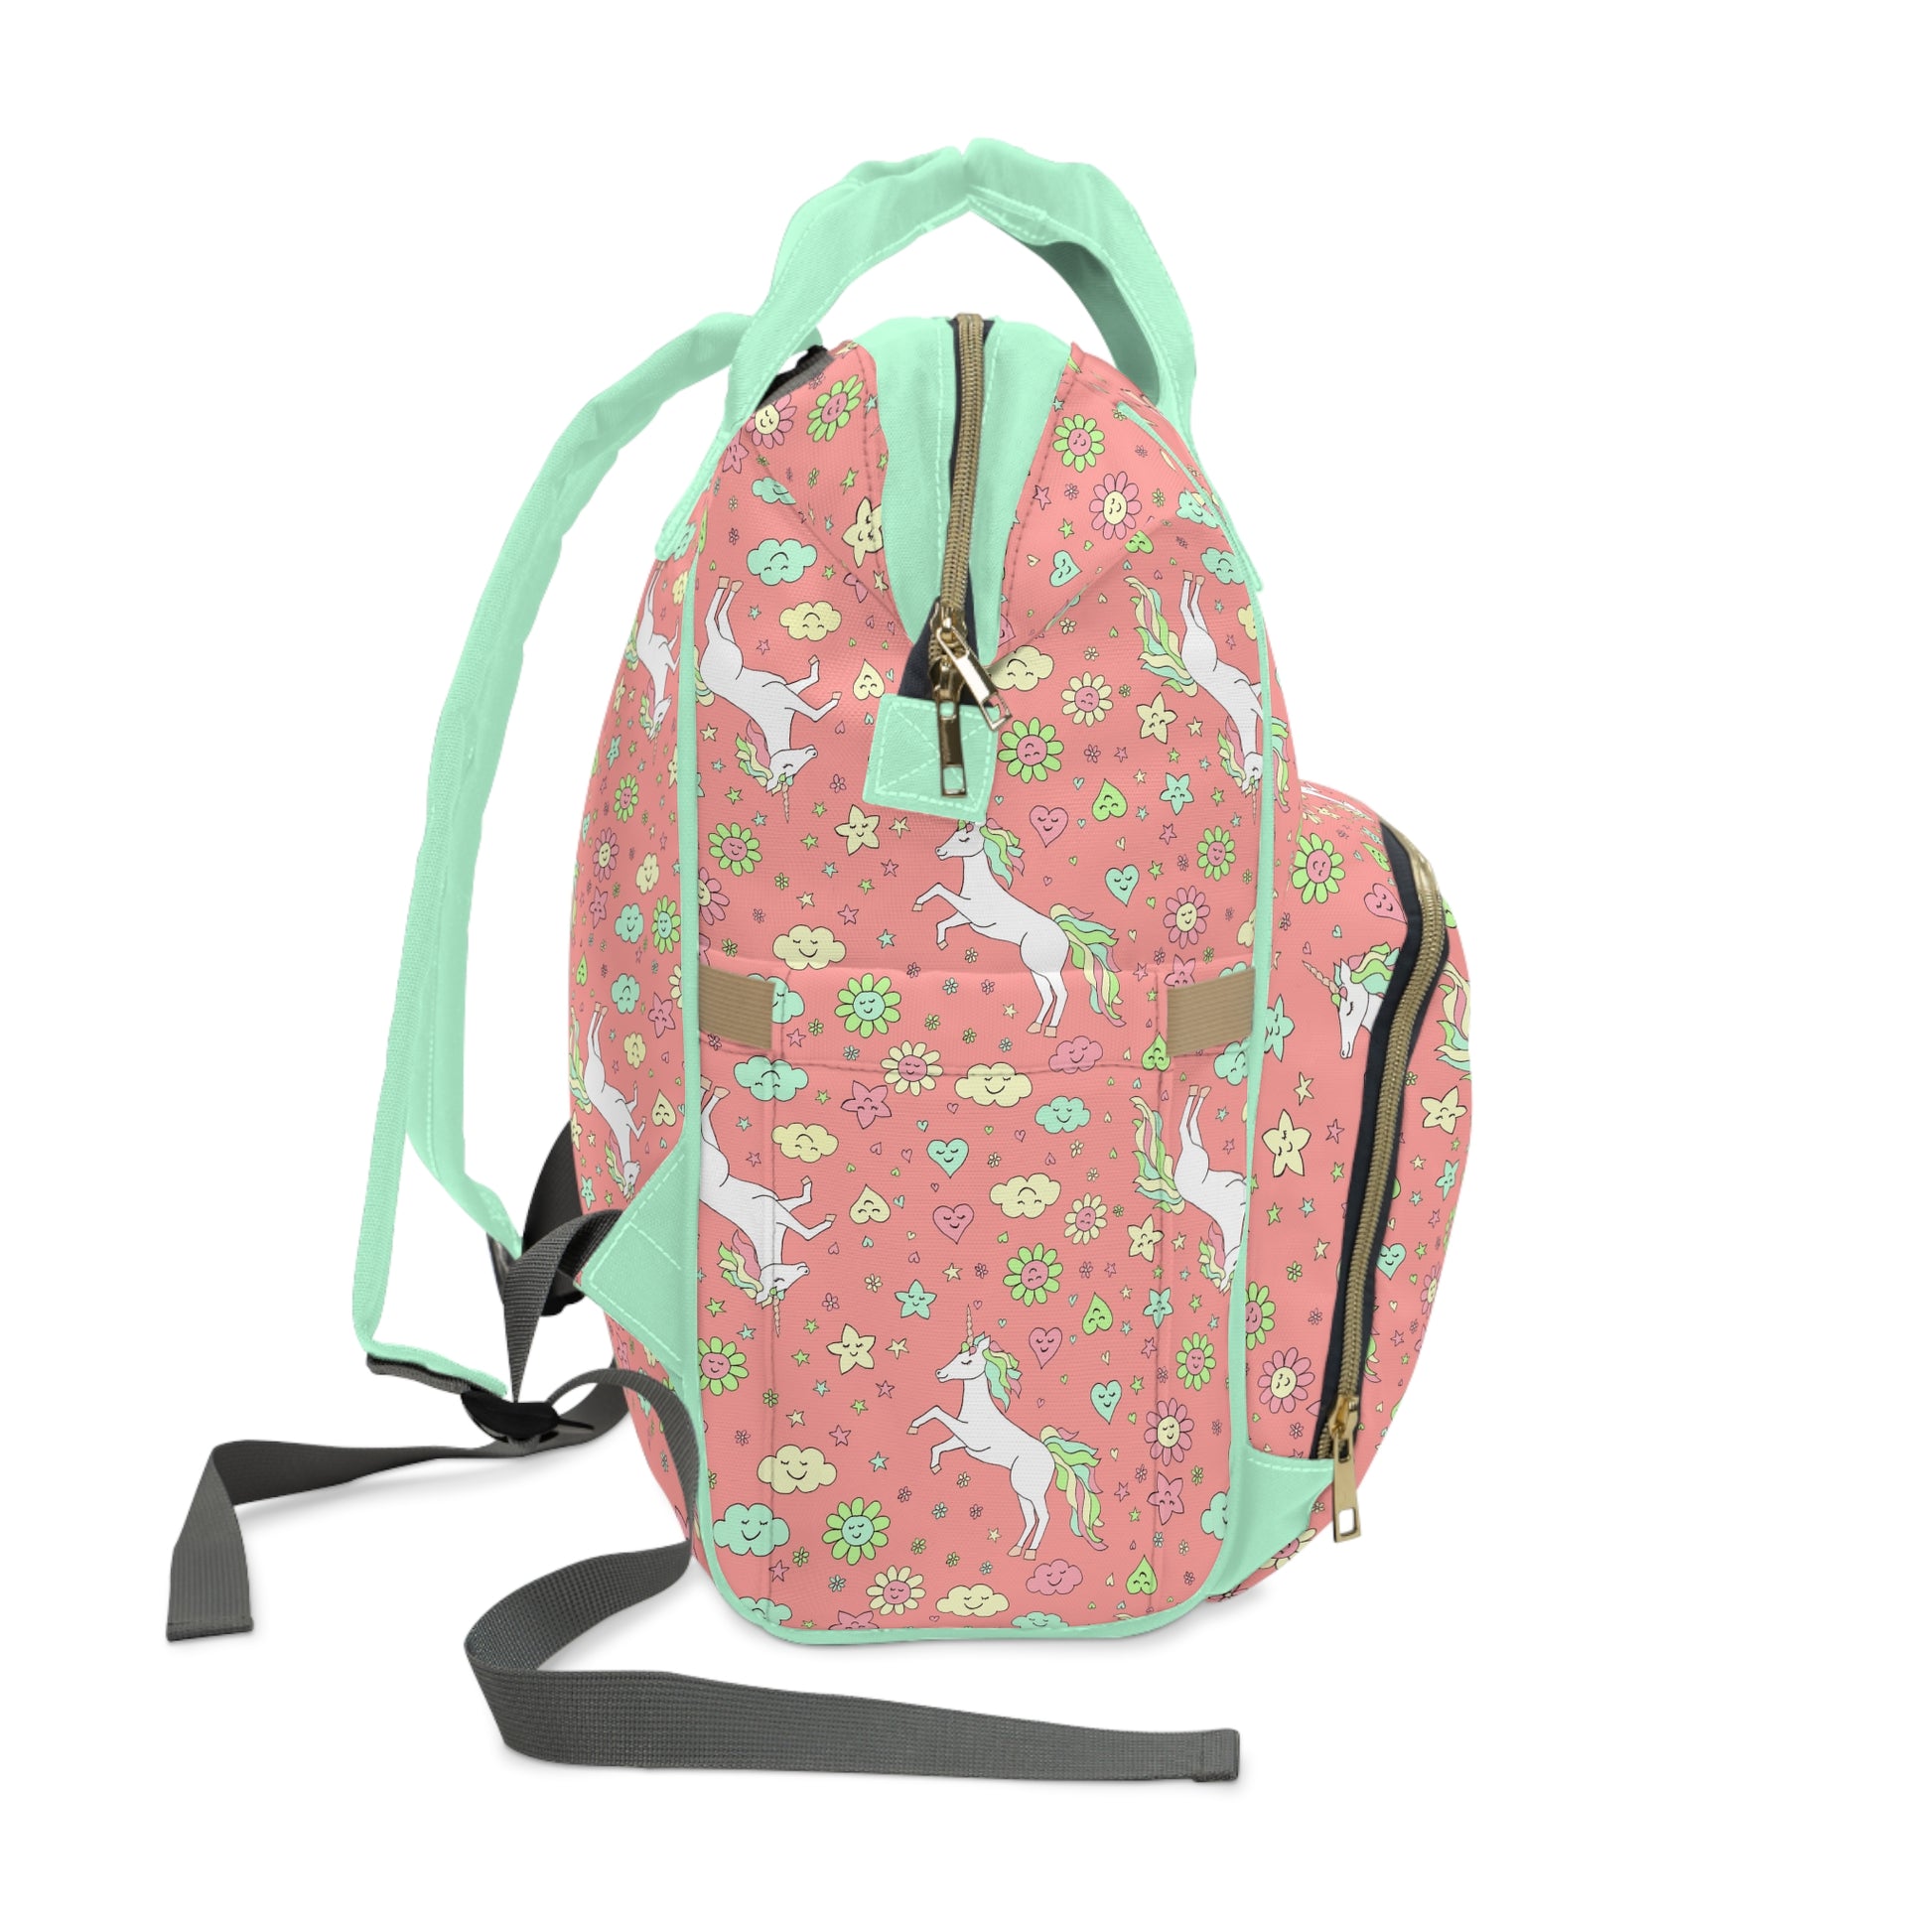 Pink unicorn-themed baby changing backpack, perfect for cloth nappies and on-the-go parenting